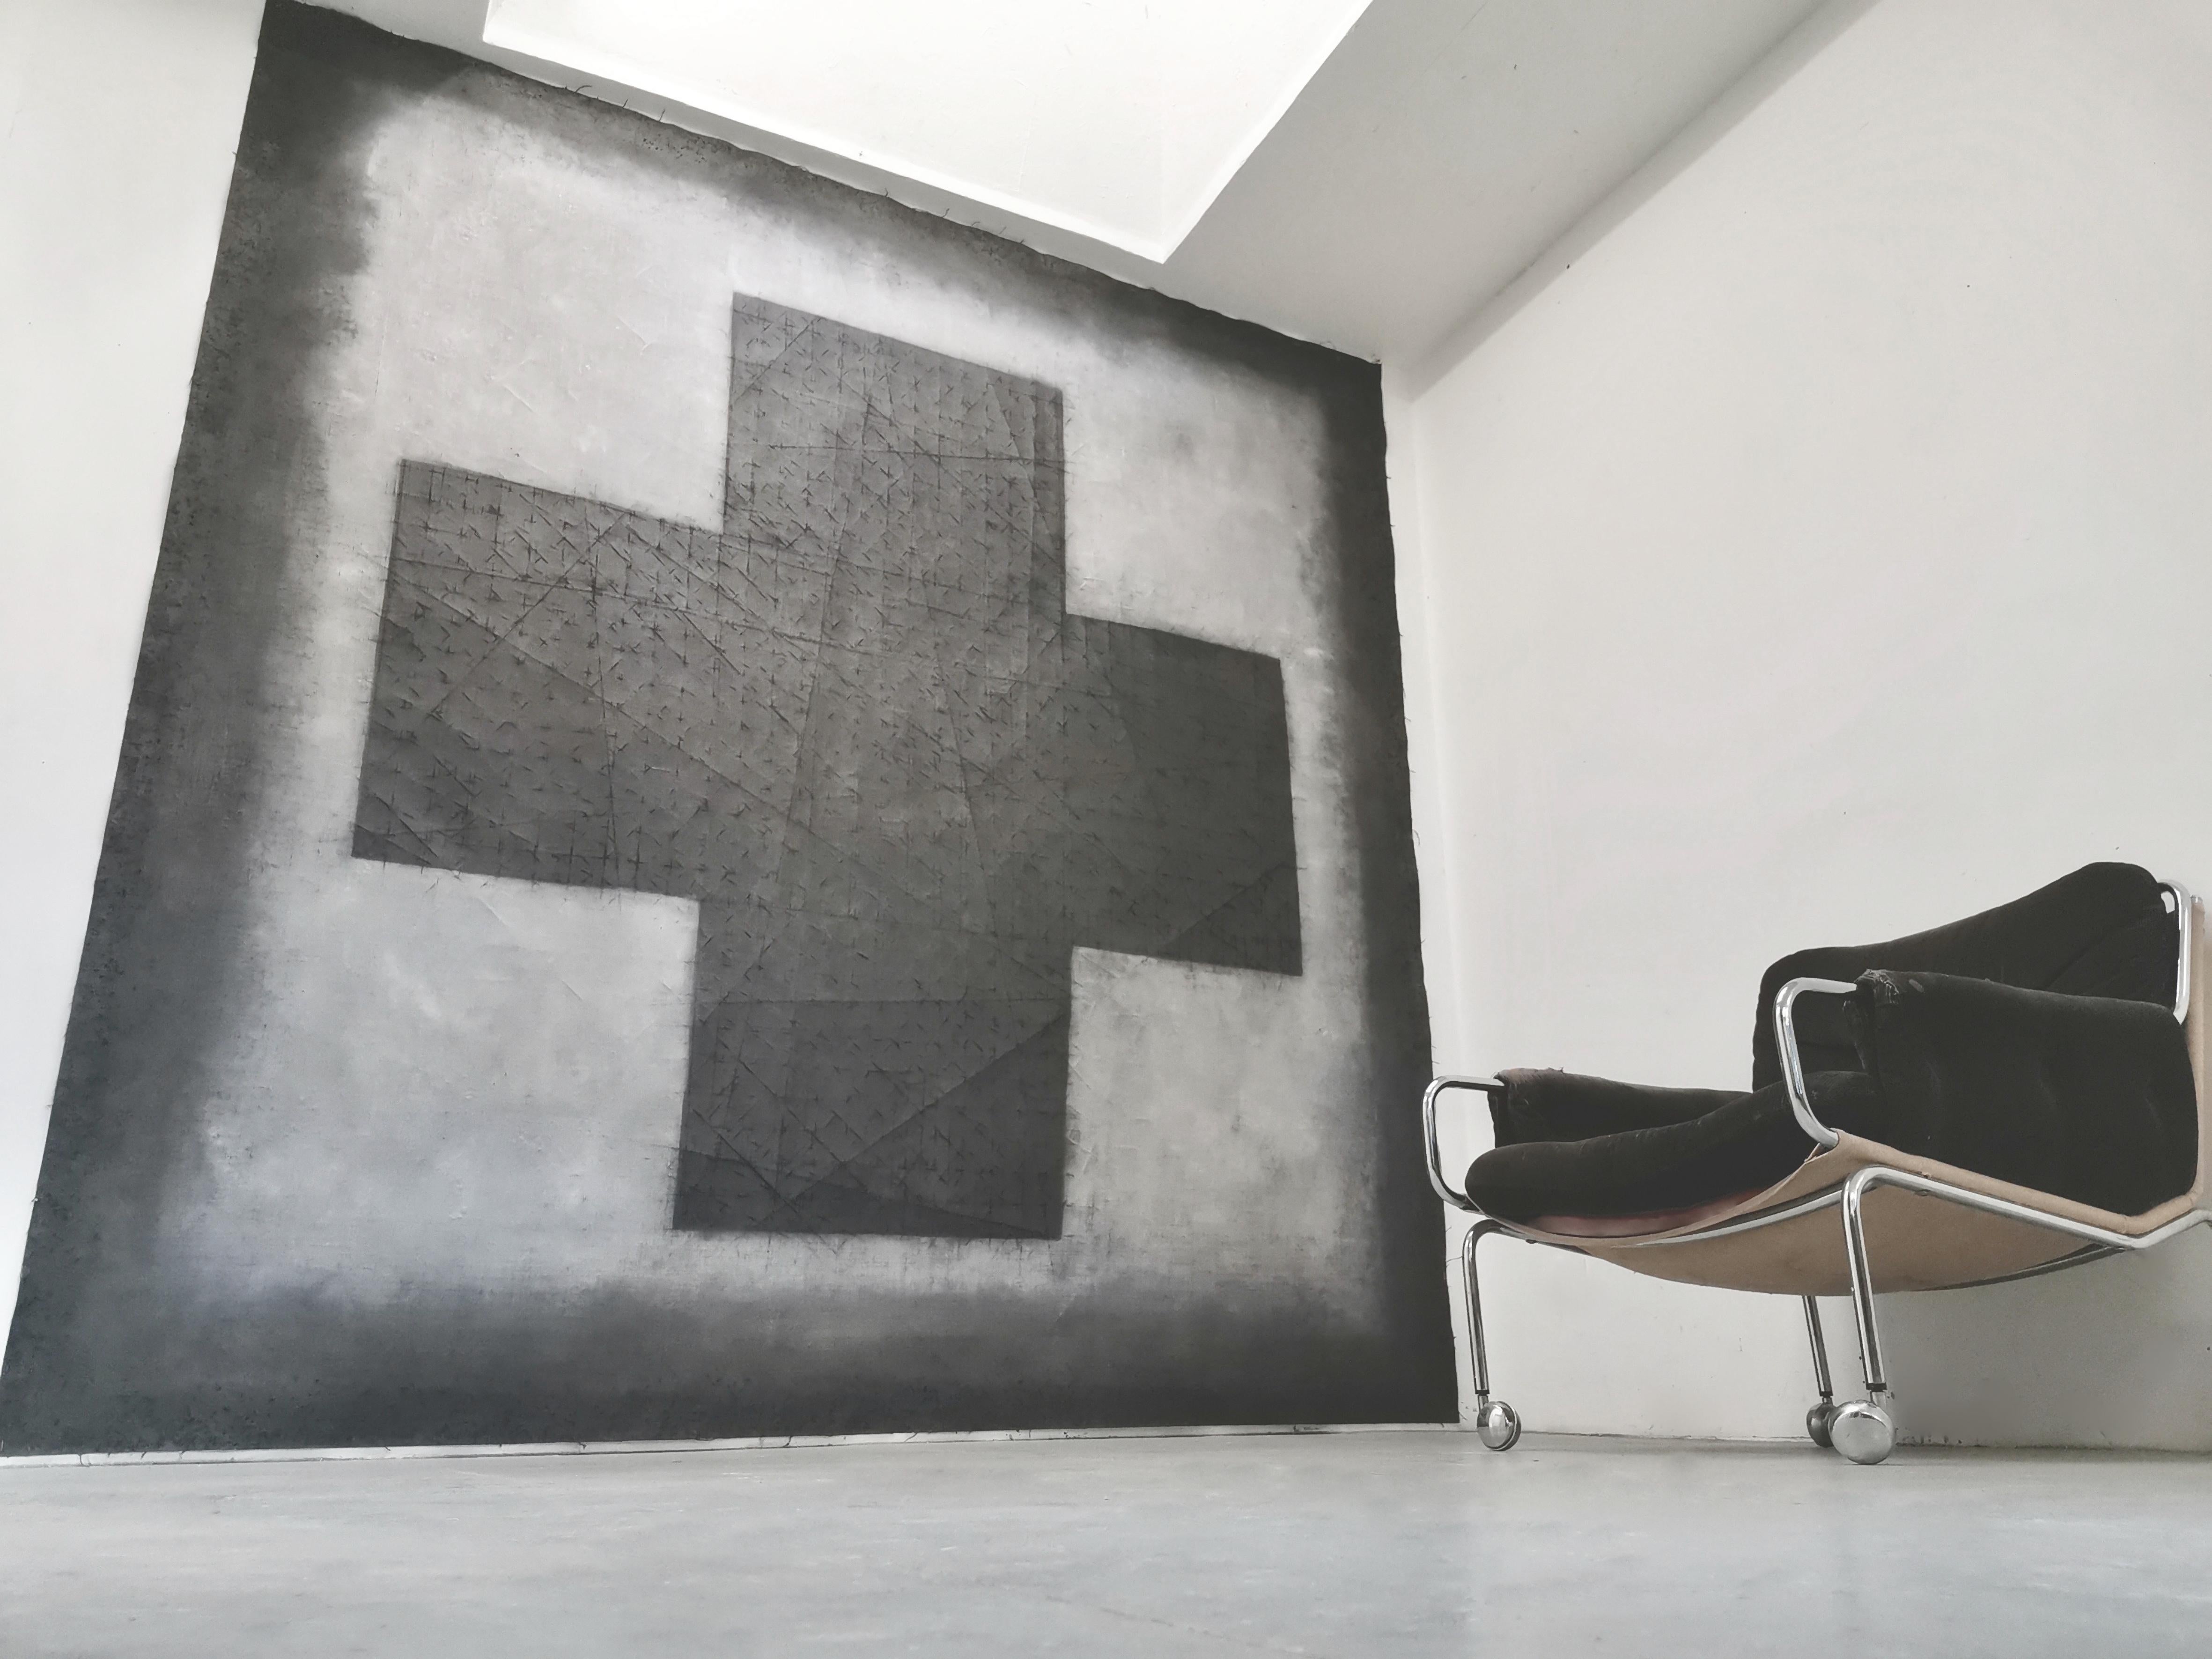 Mixed media and oil on un-stretched linen - Unframed.

In 2004, Muckensturm began working with oil on large scale canvases. He isolates gestural elements, enlarging them on the picture plane to explore their presence in relation to the surrounding